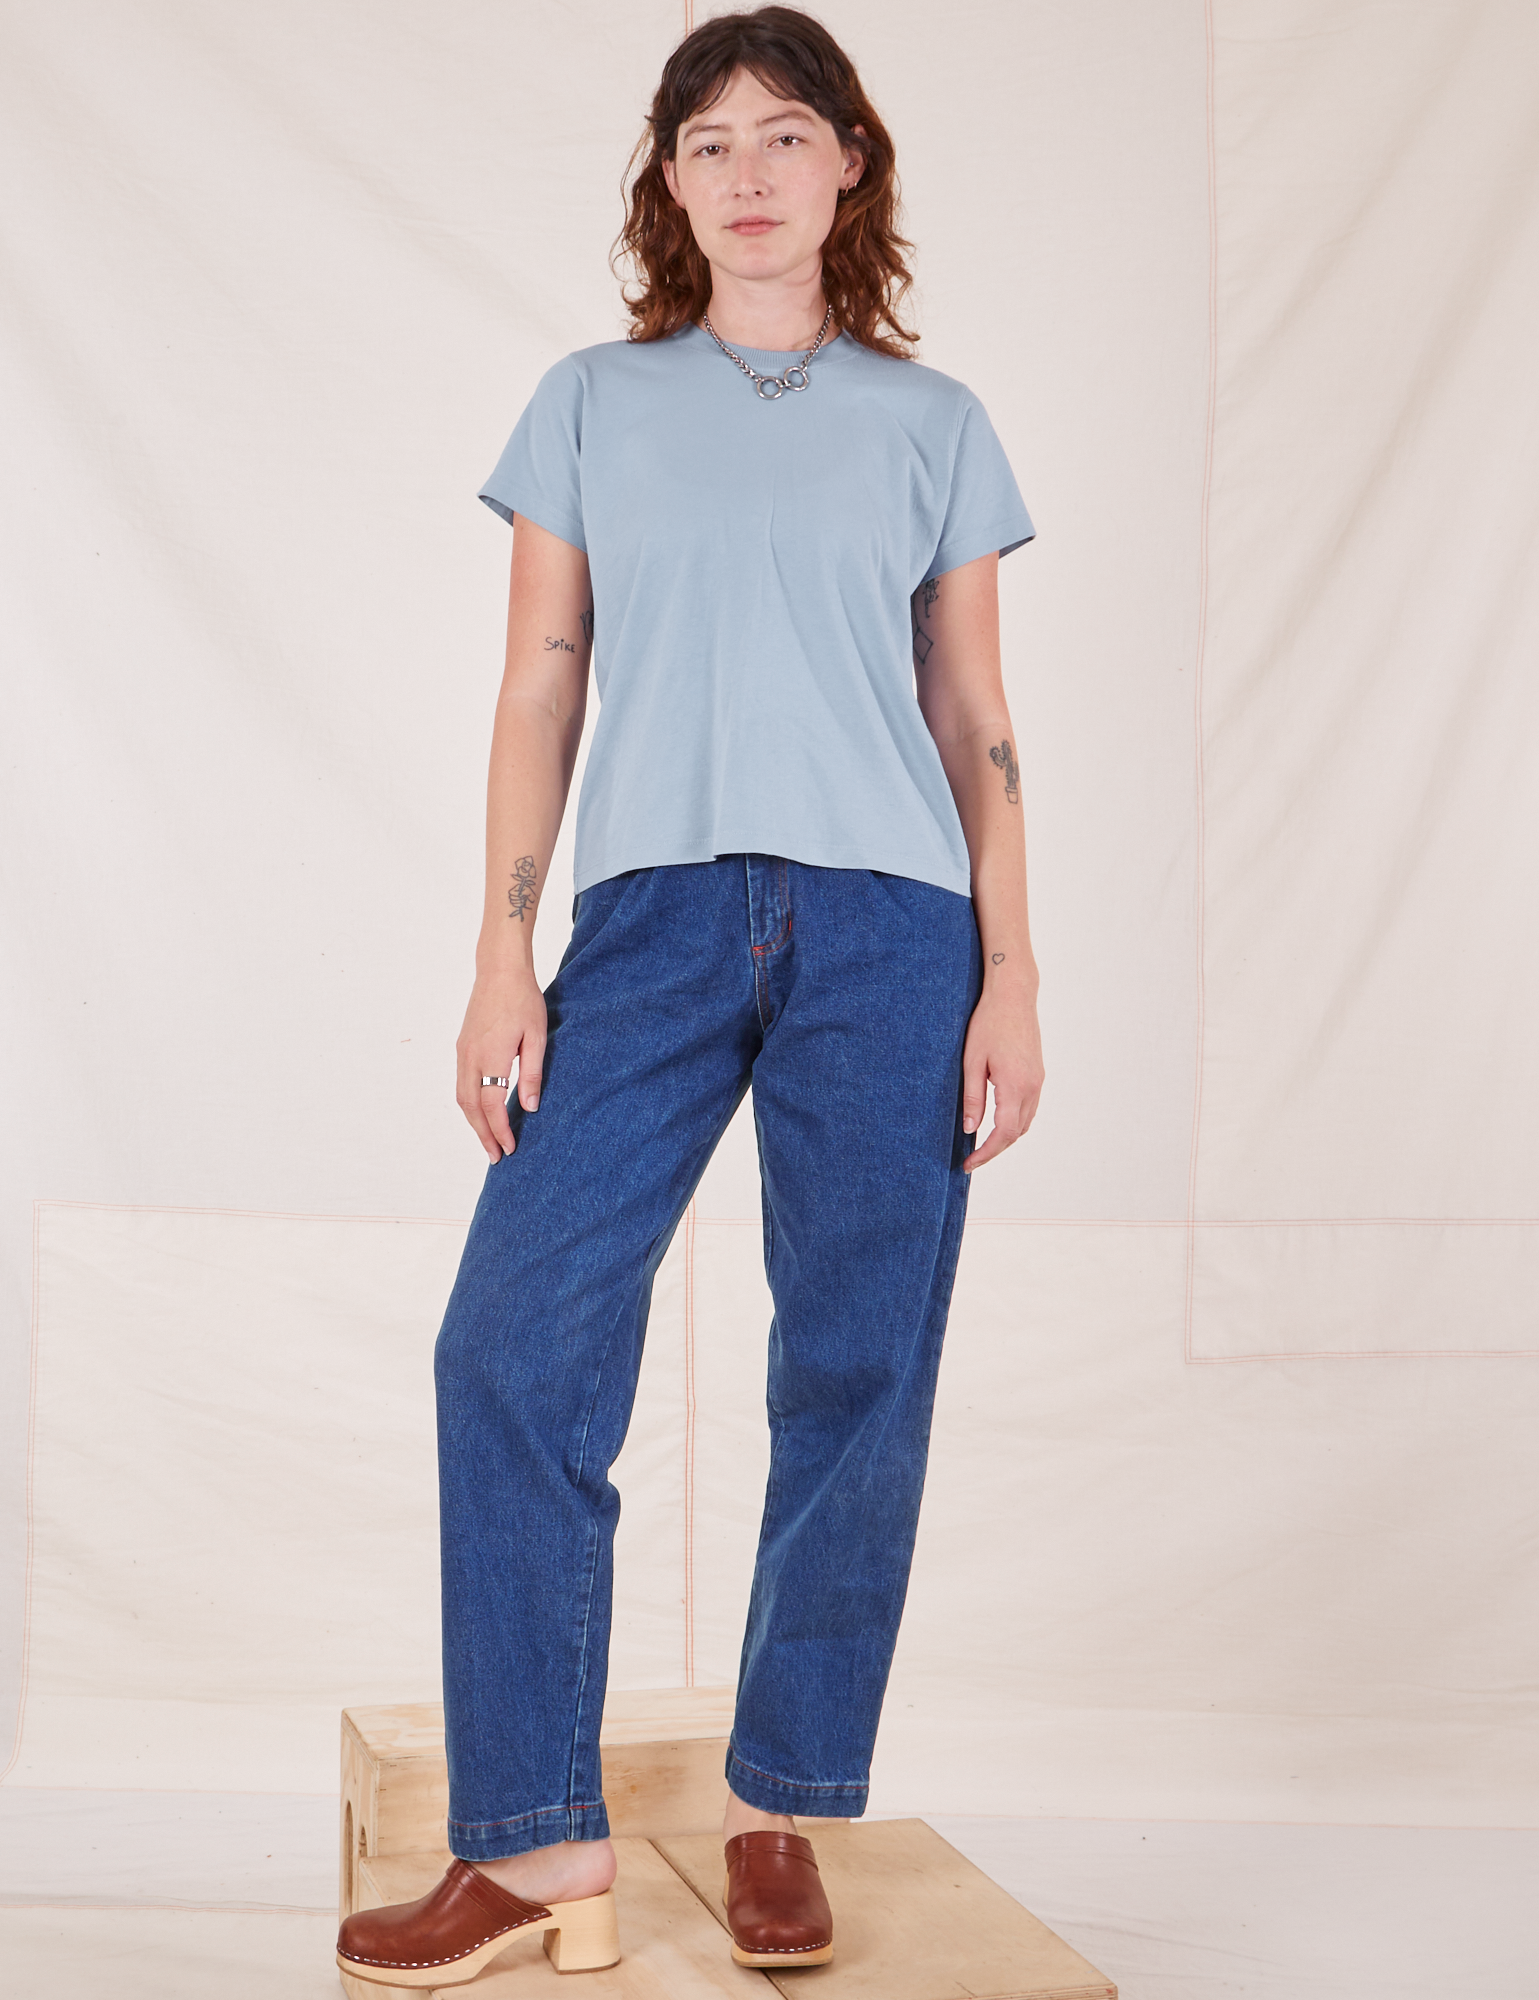 Alex is 5&#39;8&quot; and wearing P The Organic Vintage Tee in Periwinkle paired with dark wash Denim Trouser Jeans